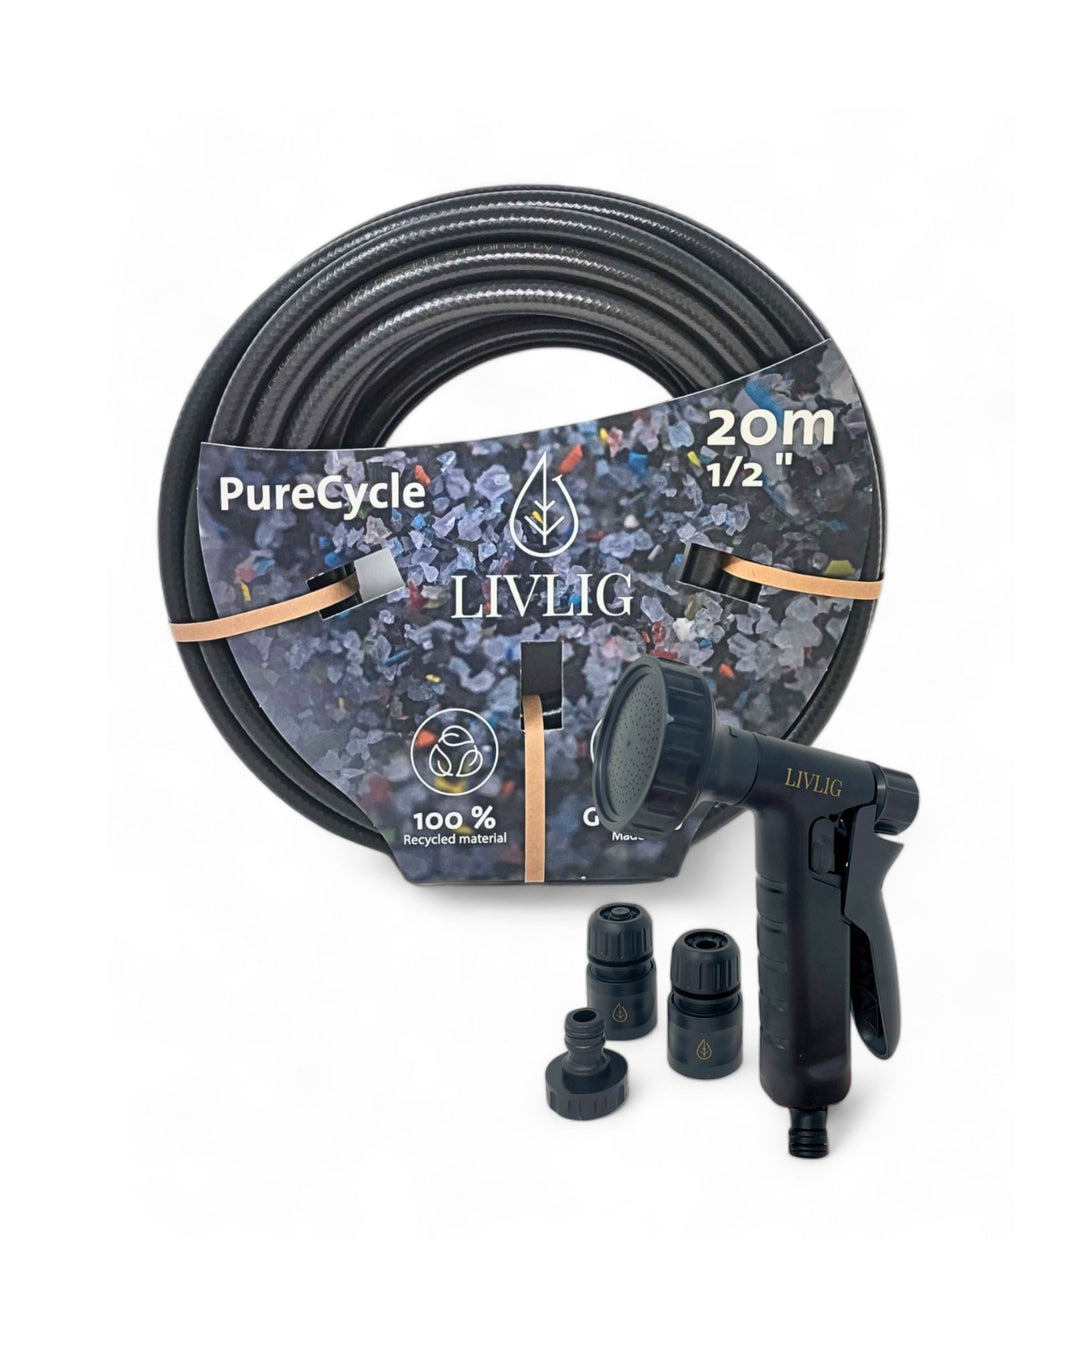 Garden hose PureCycle in a set